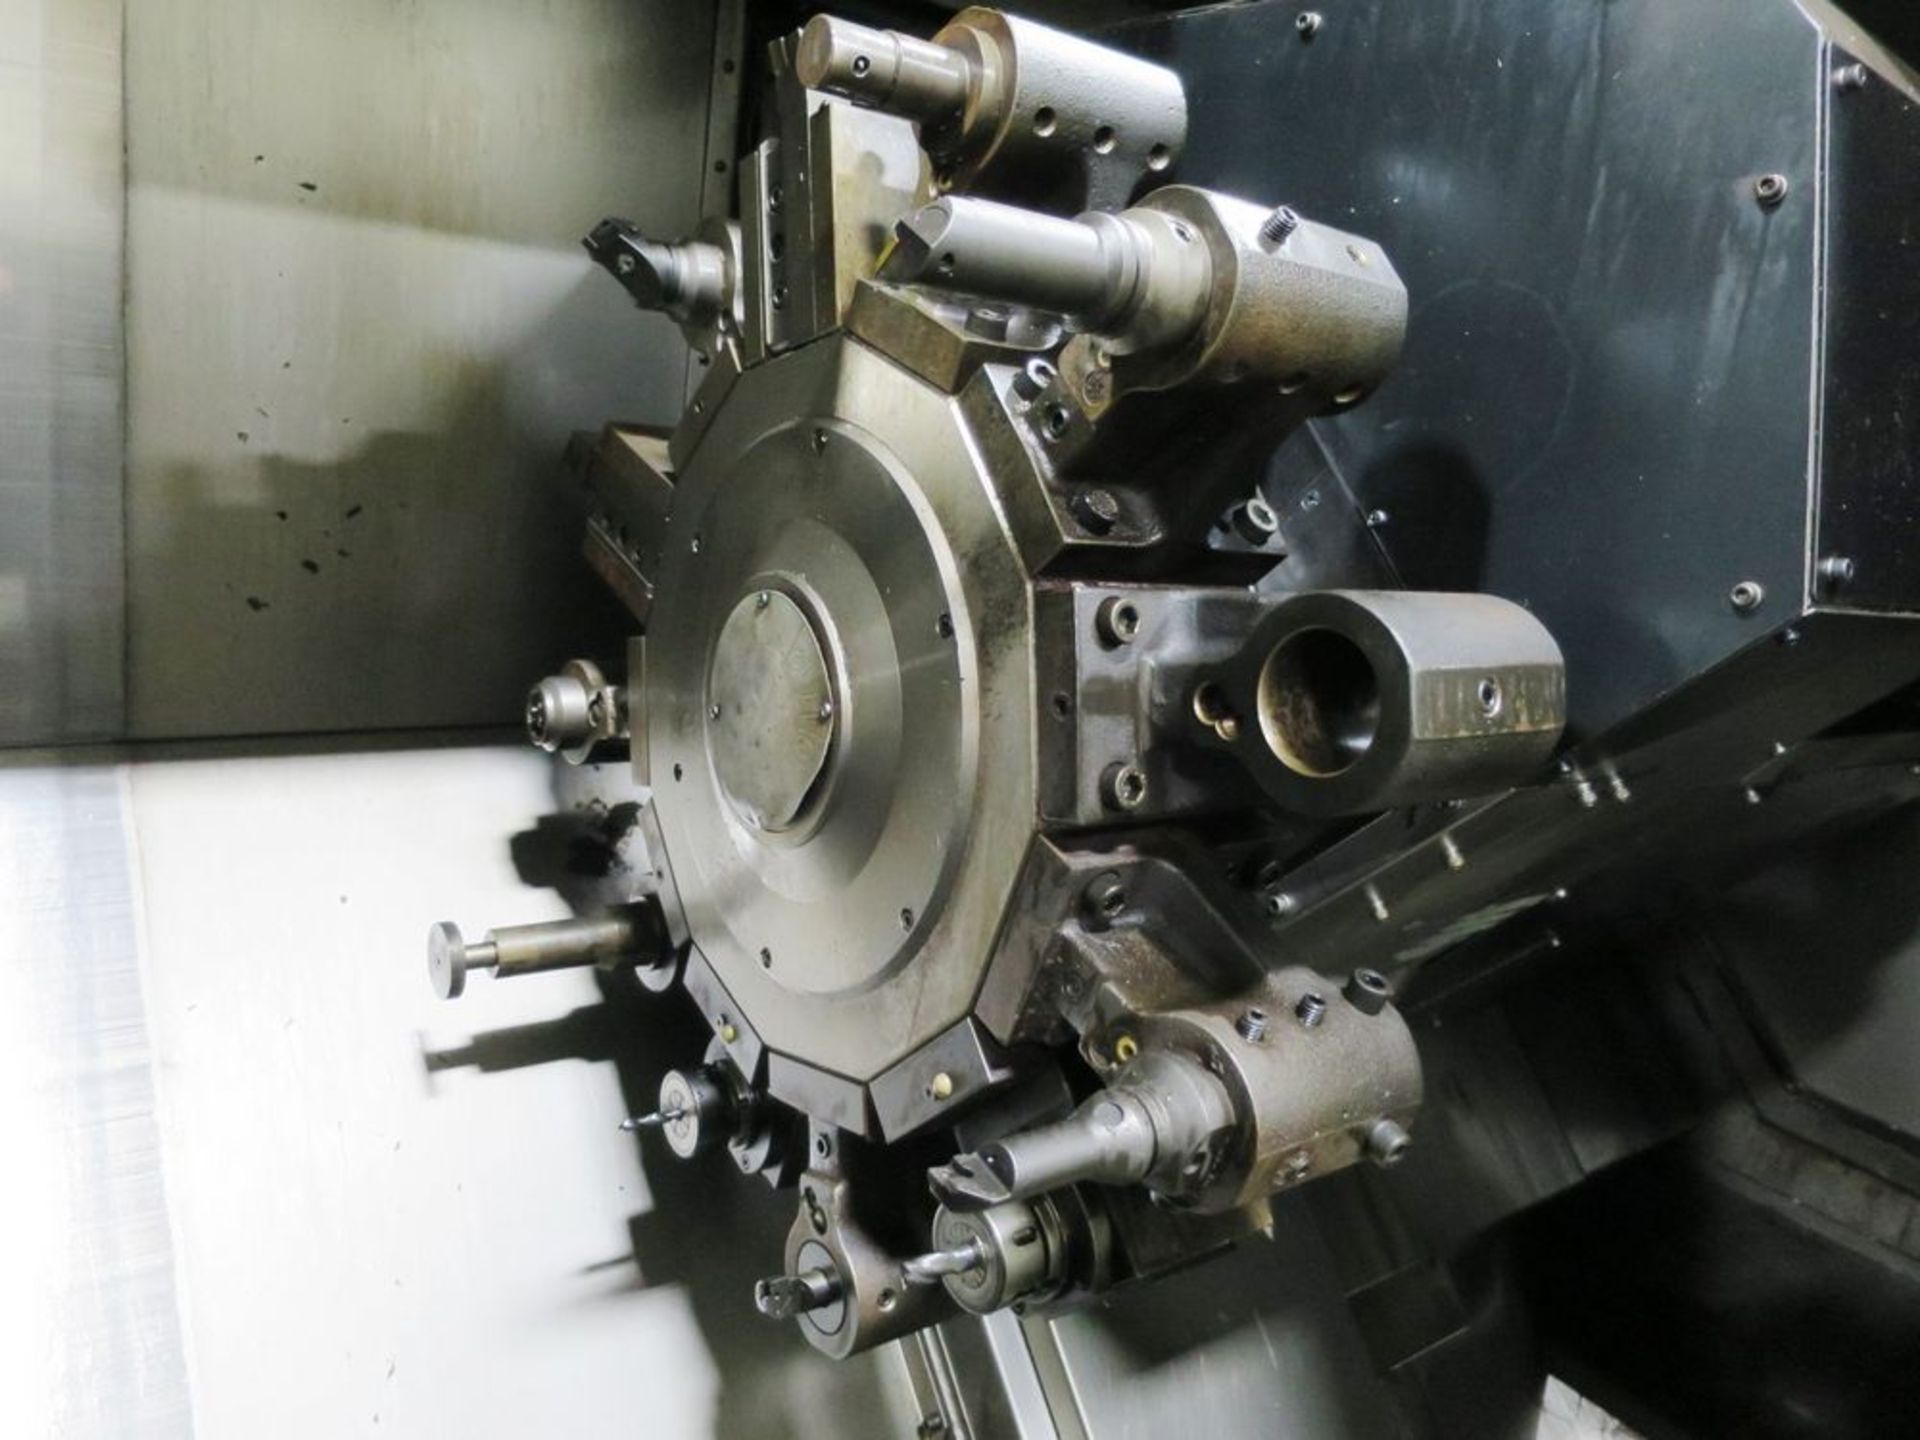 Mori Seiki SL25Y/500 Multi-Axis CNC Turning Center Chucker, S/N 0242, New 1998 General - Image 5 of 9